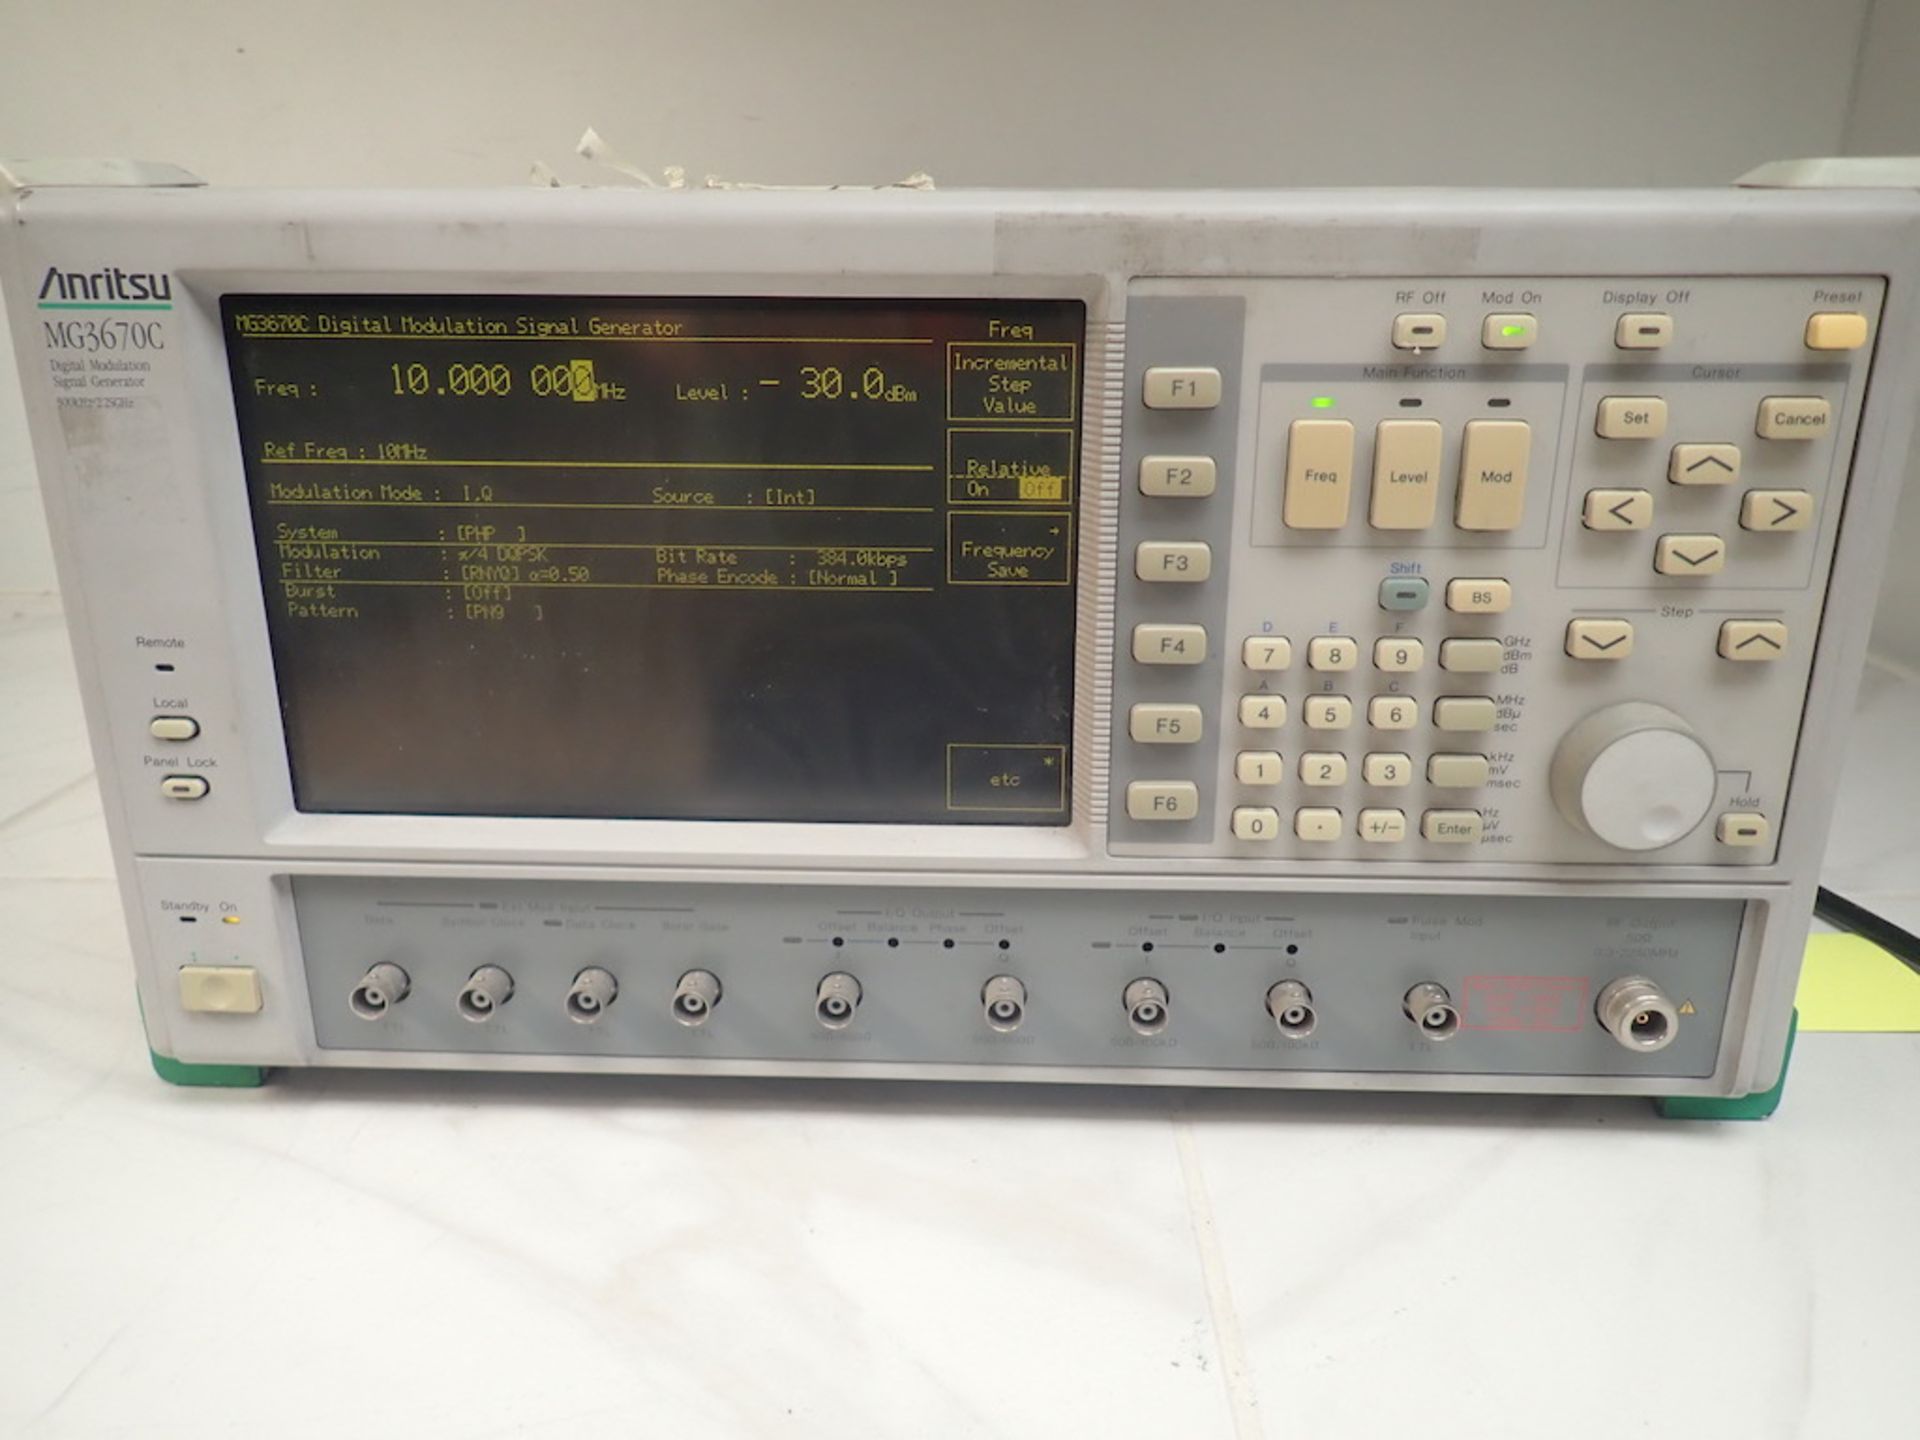 Anritsu Mg3670C Digital Modulation Signal Generator. one unit used for pictures serial numbers